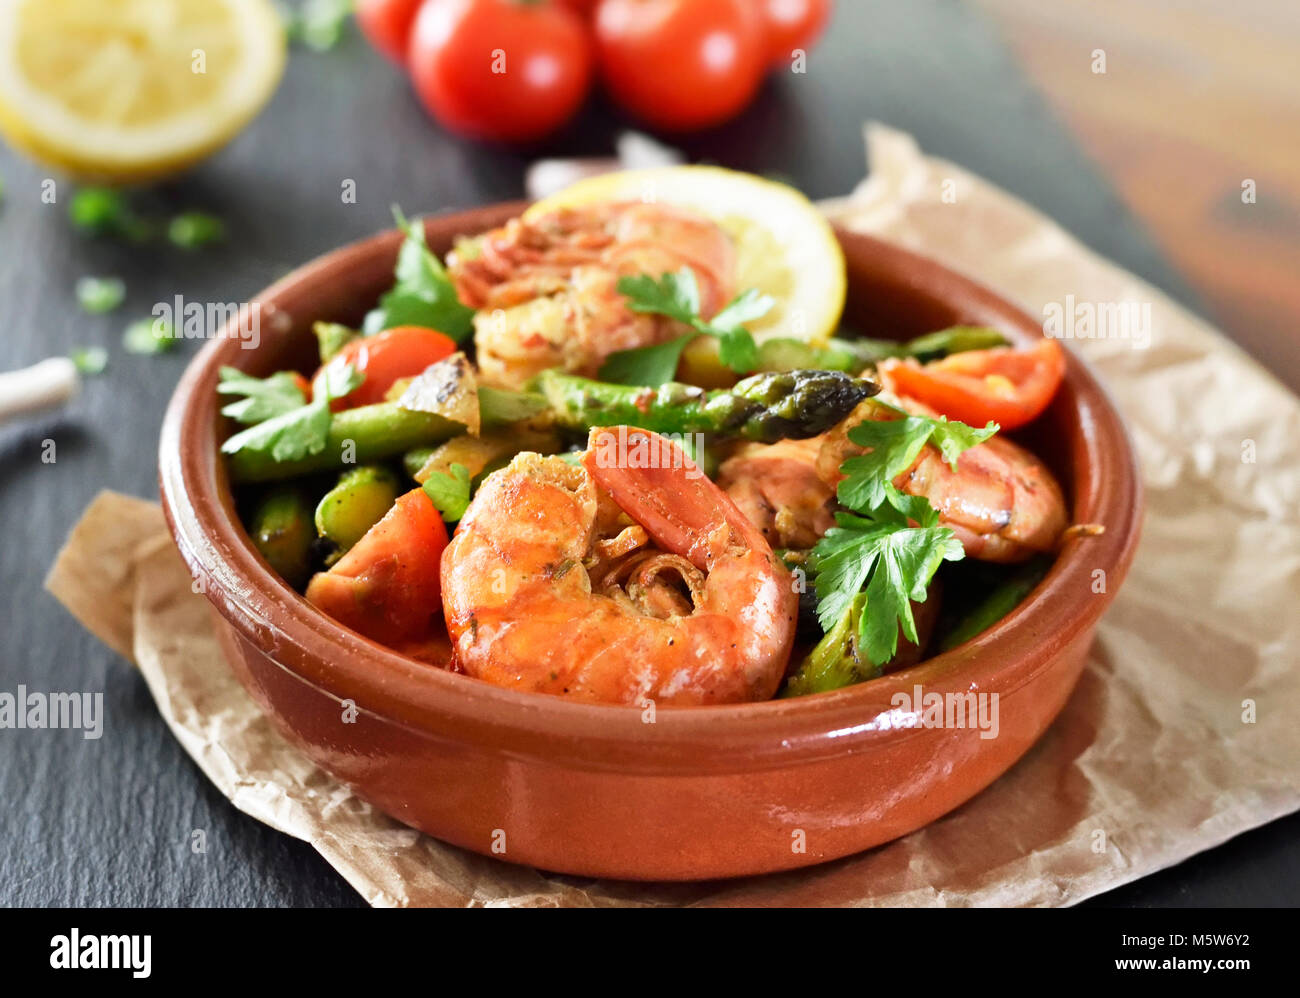 Delicious shrimp or seafood meal with green asparagus, tomatoes and decorative parsley. Spanish tapas plate in a bowl, close-up shot. Gourmet food. Stock Photo